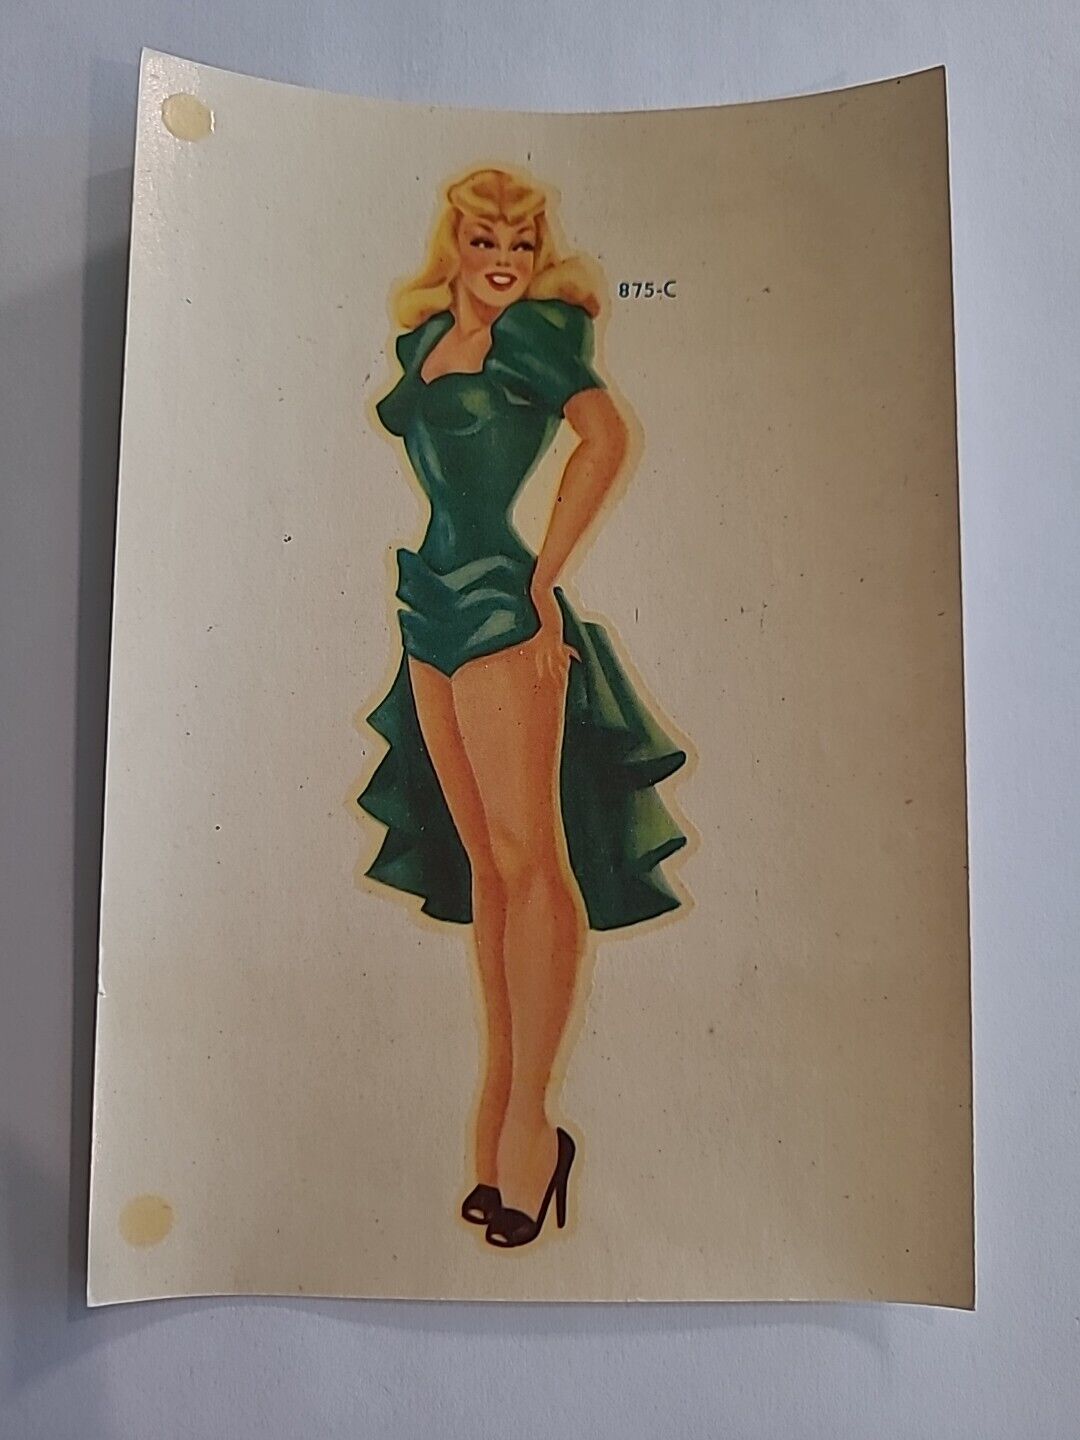 Meyercord Pinup Girl Vintage Transfer Decal 1950s 875-c  e